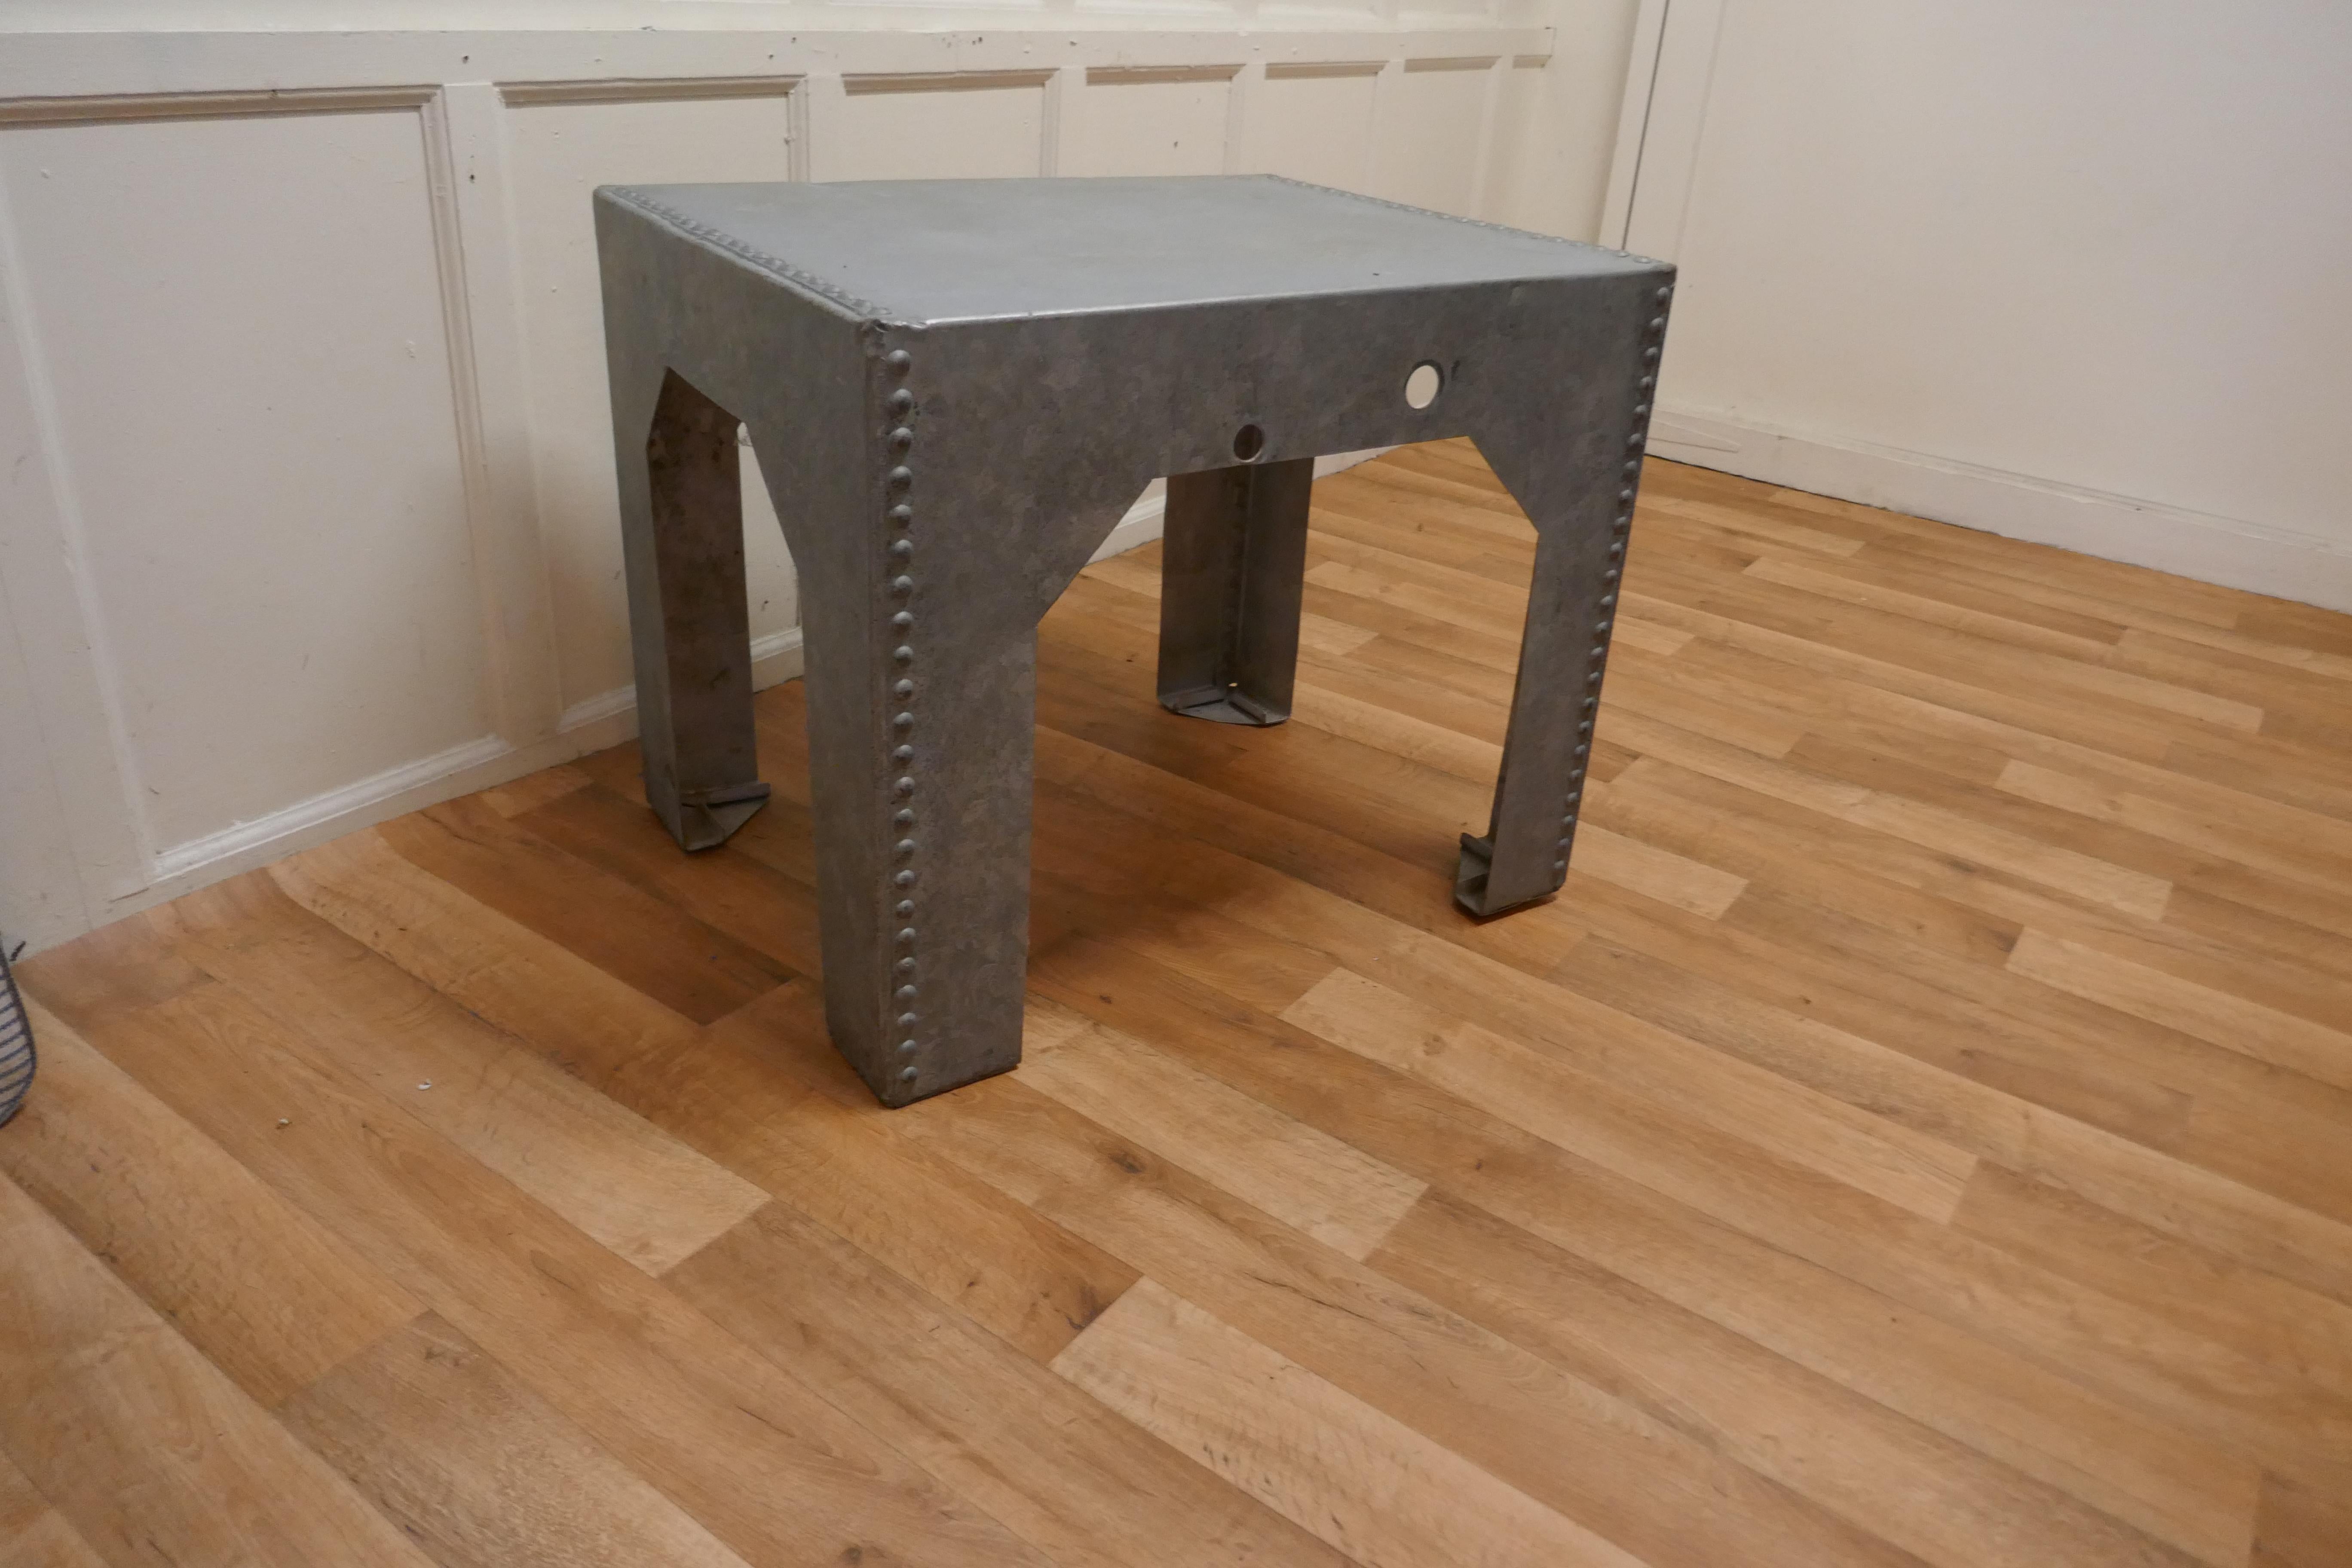 Industrial galvanised water tank made into a coffee table.

This quirky industrial table was originally made as a roof water tank, but it has never been used as such, it has been professionally converted into a convenient, unique coffee